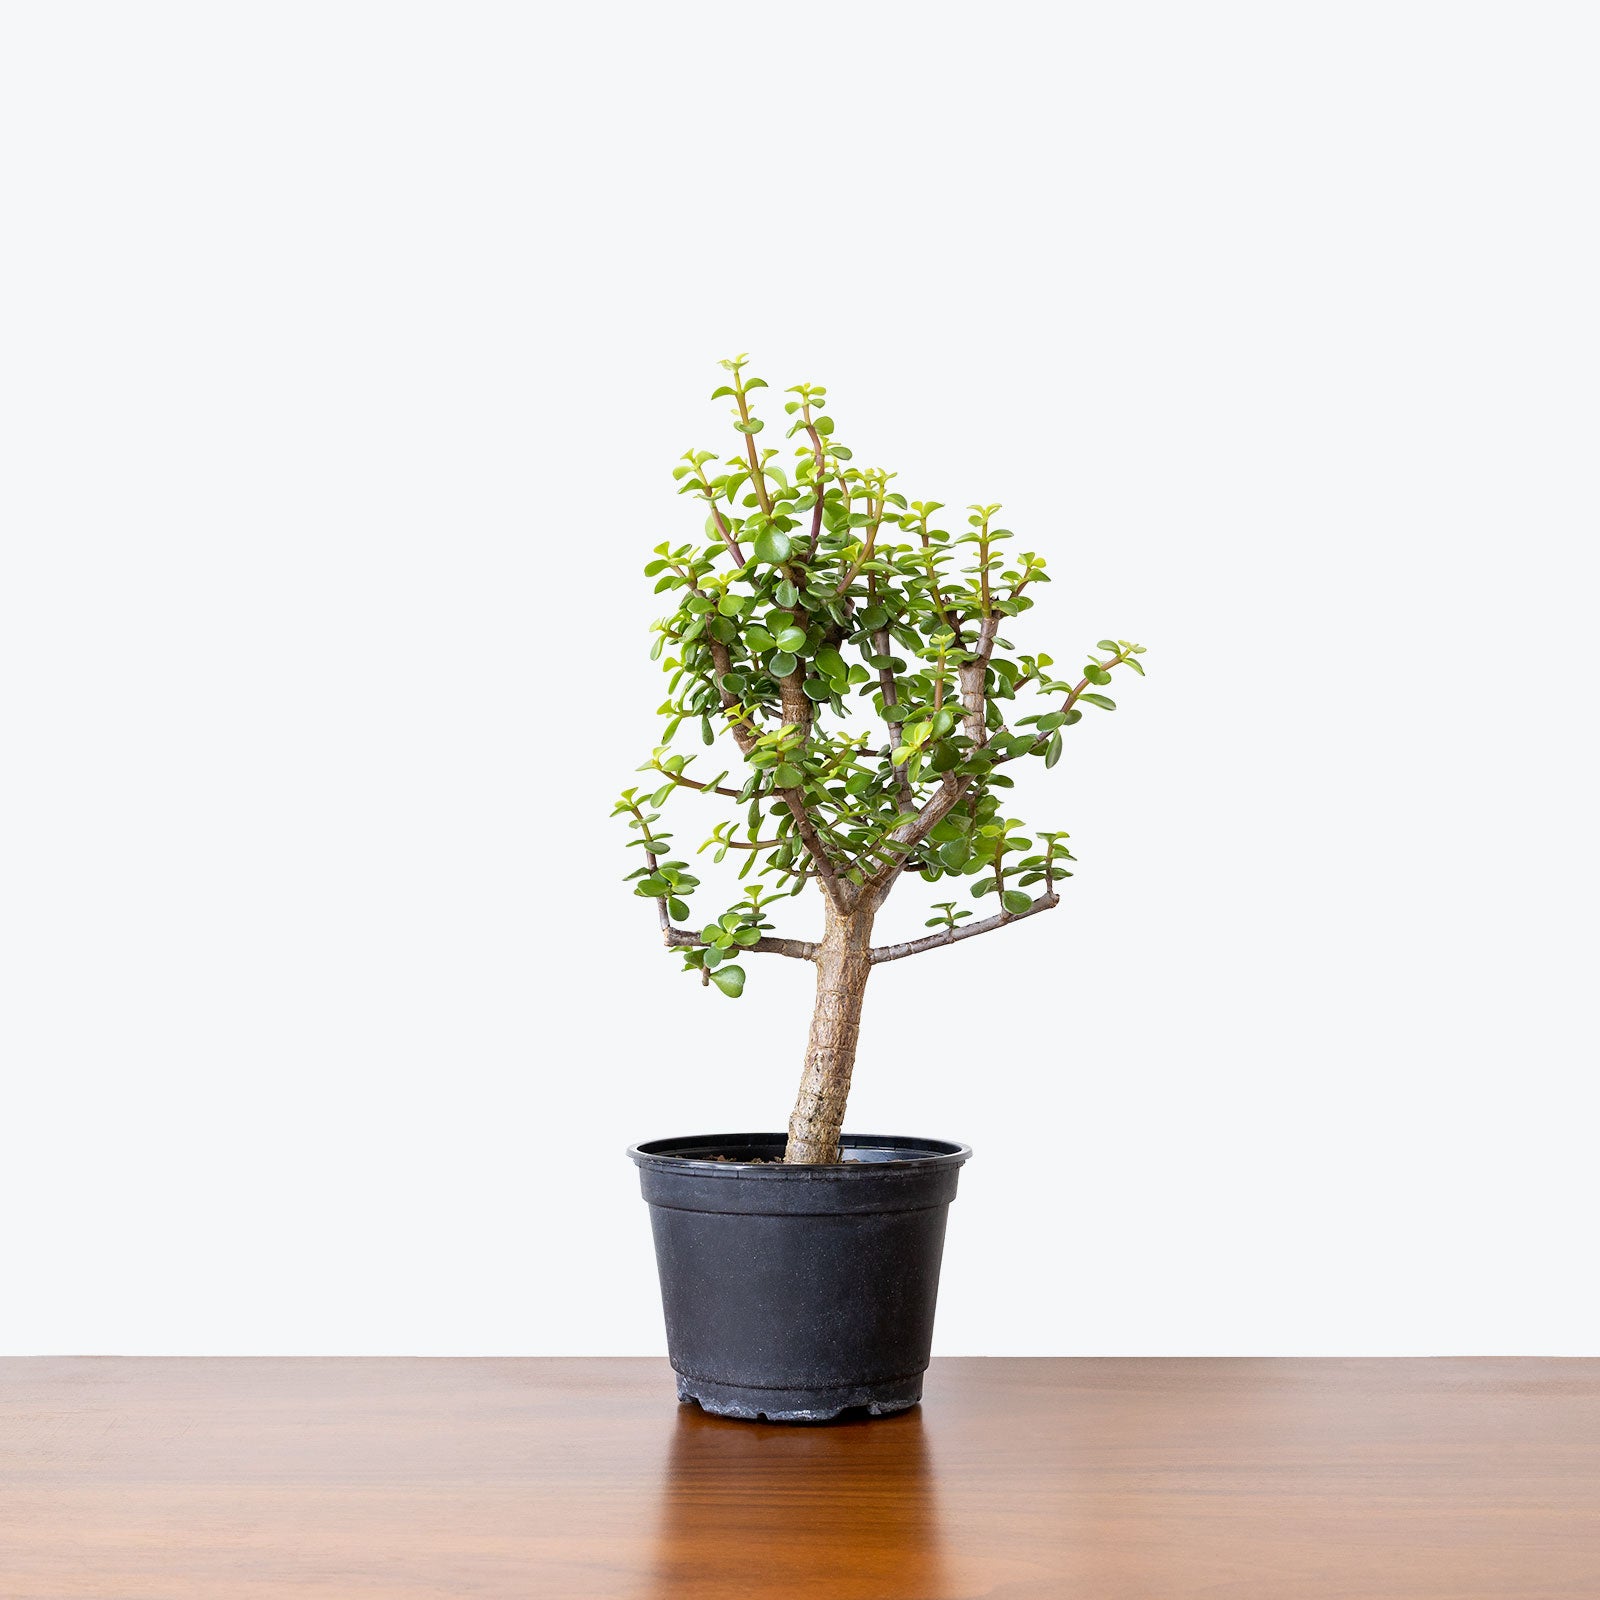 Dwarf Jade | Portulacaria Afra | Care Guide and Pro Tips - Delivery from Toronto across Canada - JOMO Studio